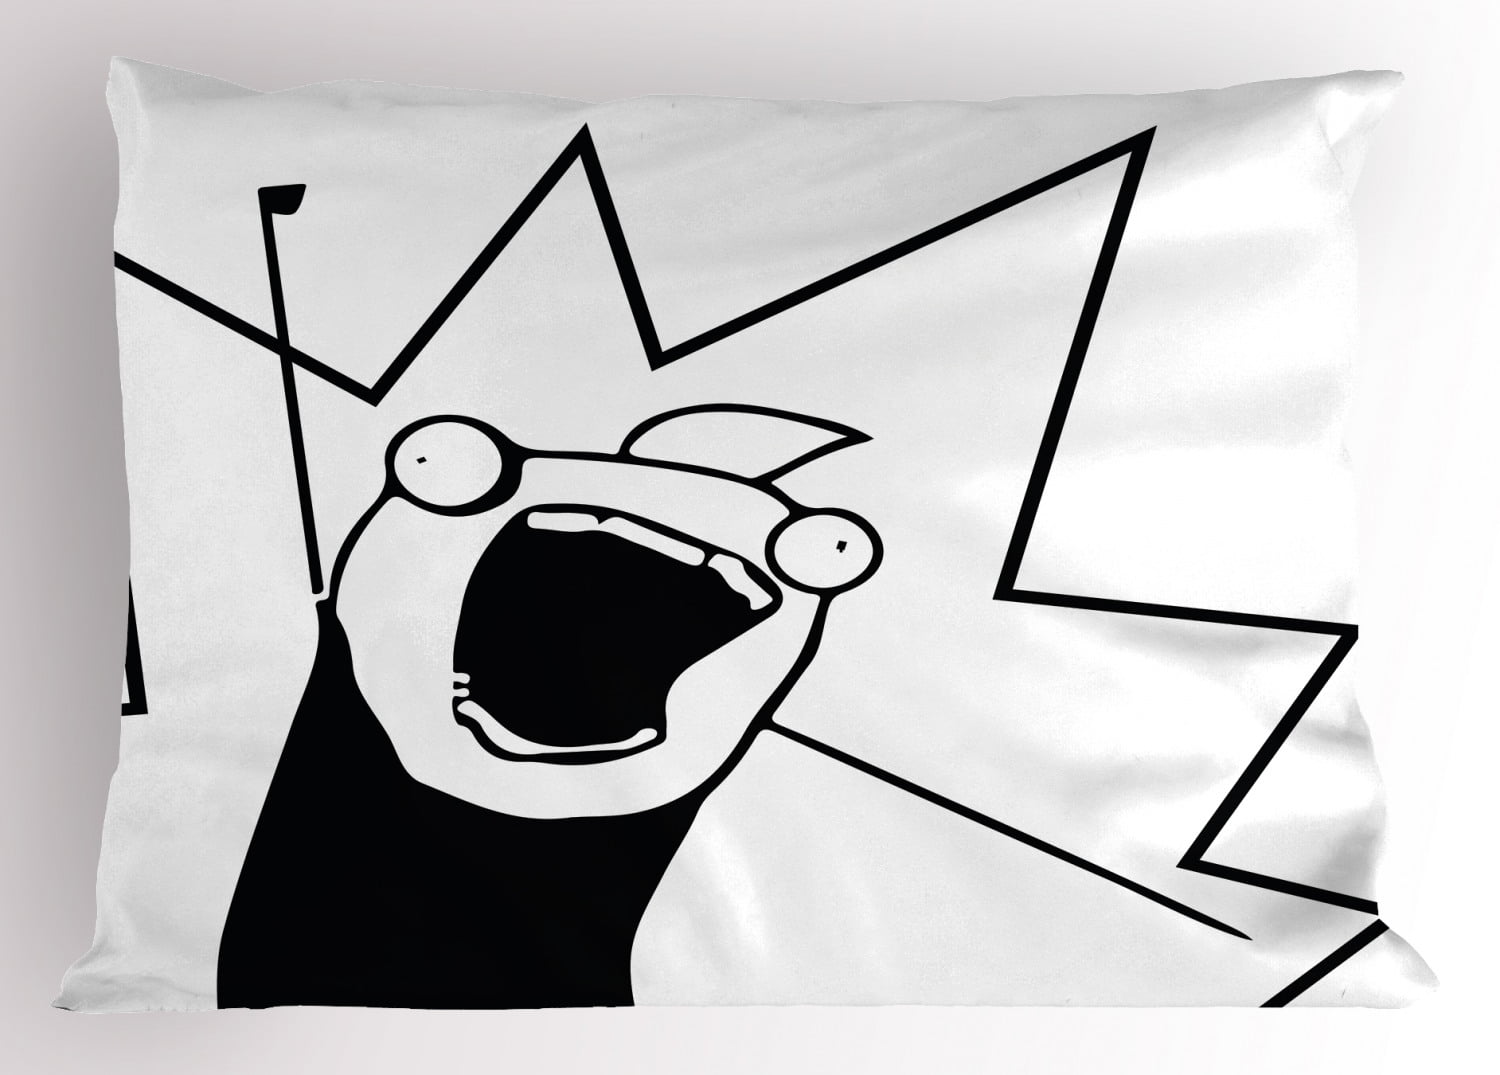 Humor Pillow Sham Cartoon Style Troll Face Guy for Annoying Popular Artful  Internet Meme Design, Decorative Standard King Size Printed Pillowcase, 36  X 20 Inches, Black and White, by Ambesonne 